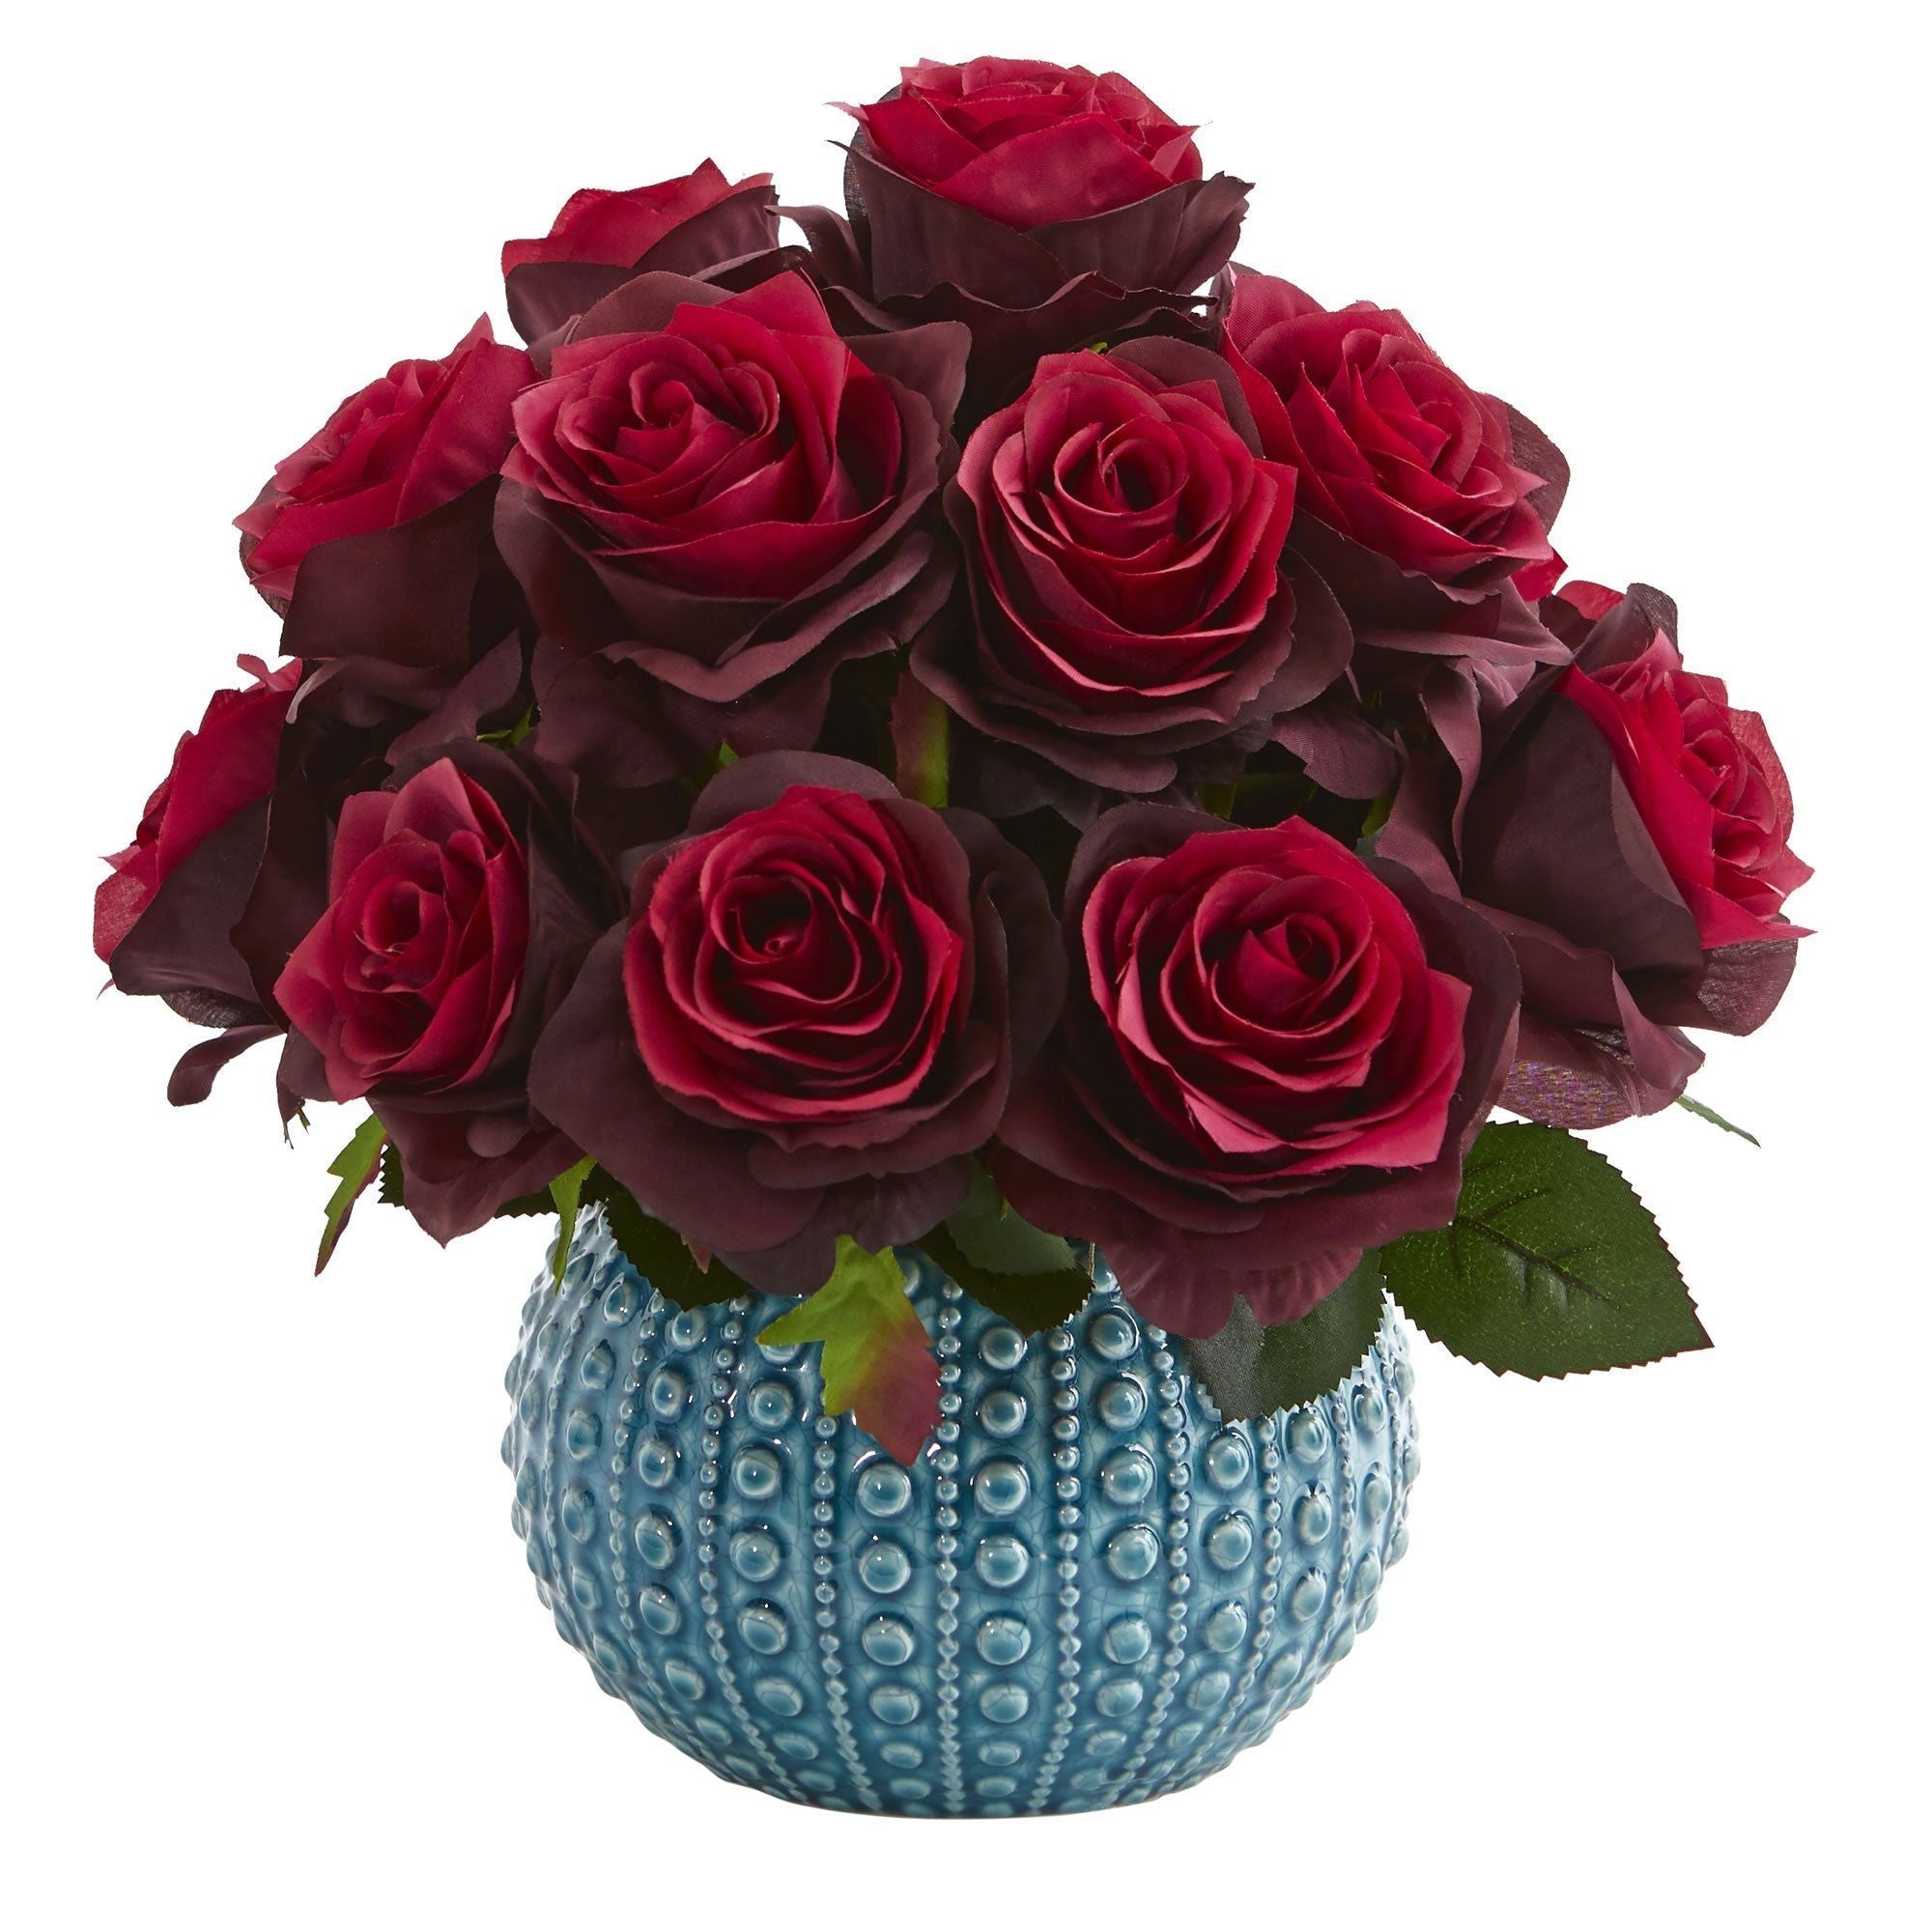 Artificial Arrangement - 11.5" Rose in Blue Ceramic Vase by Nearly Natural